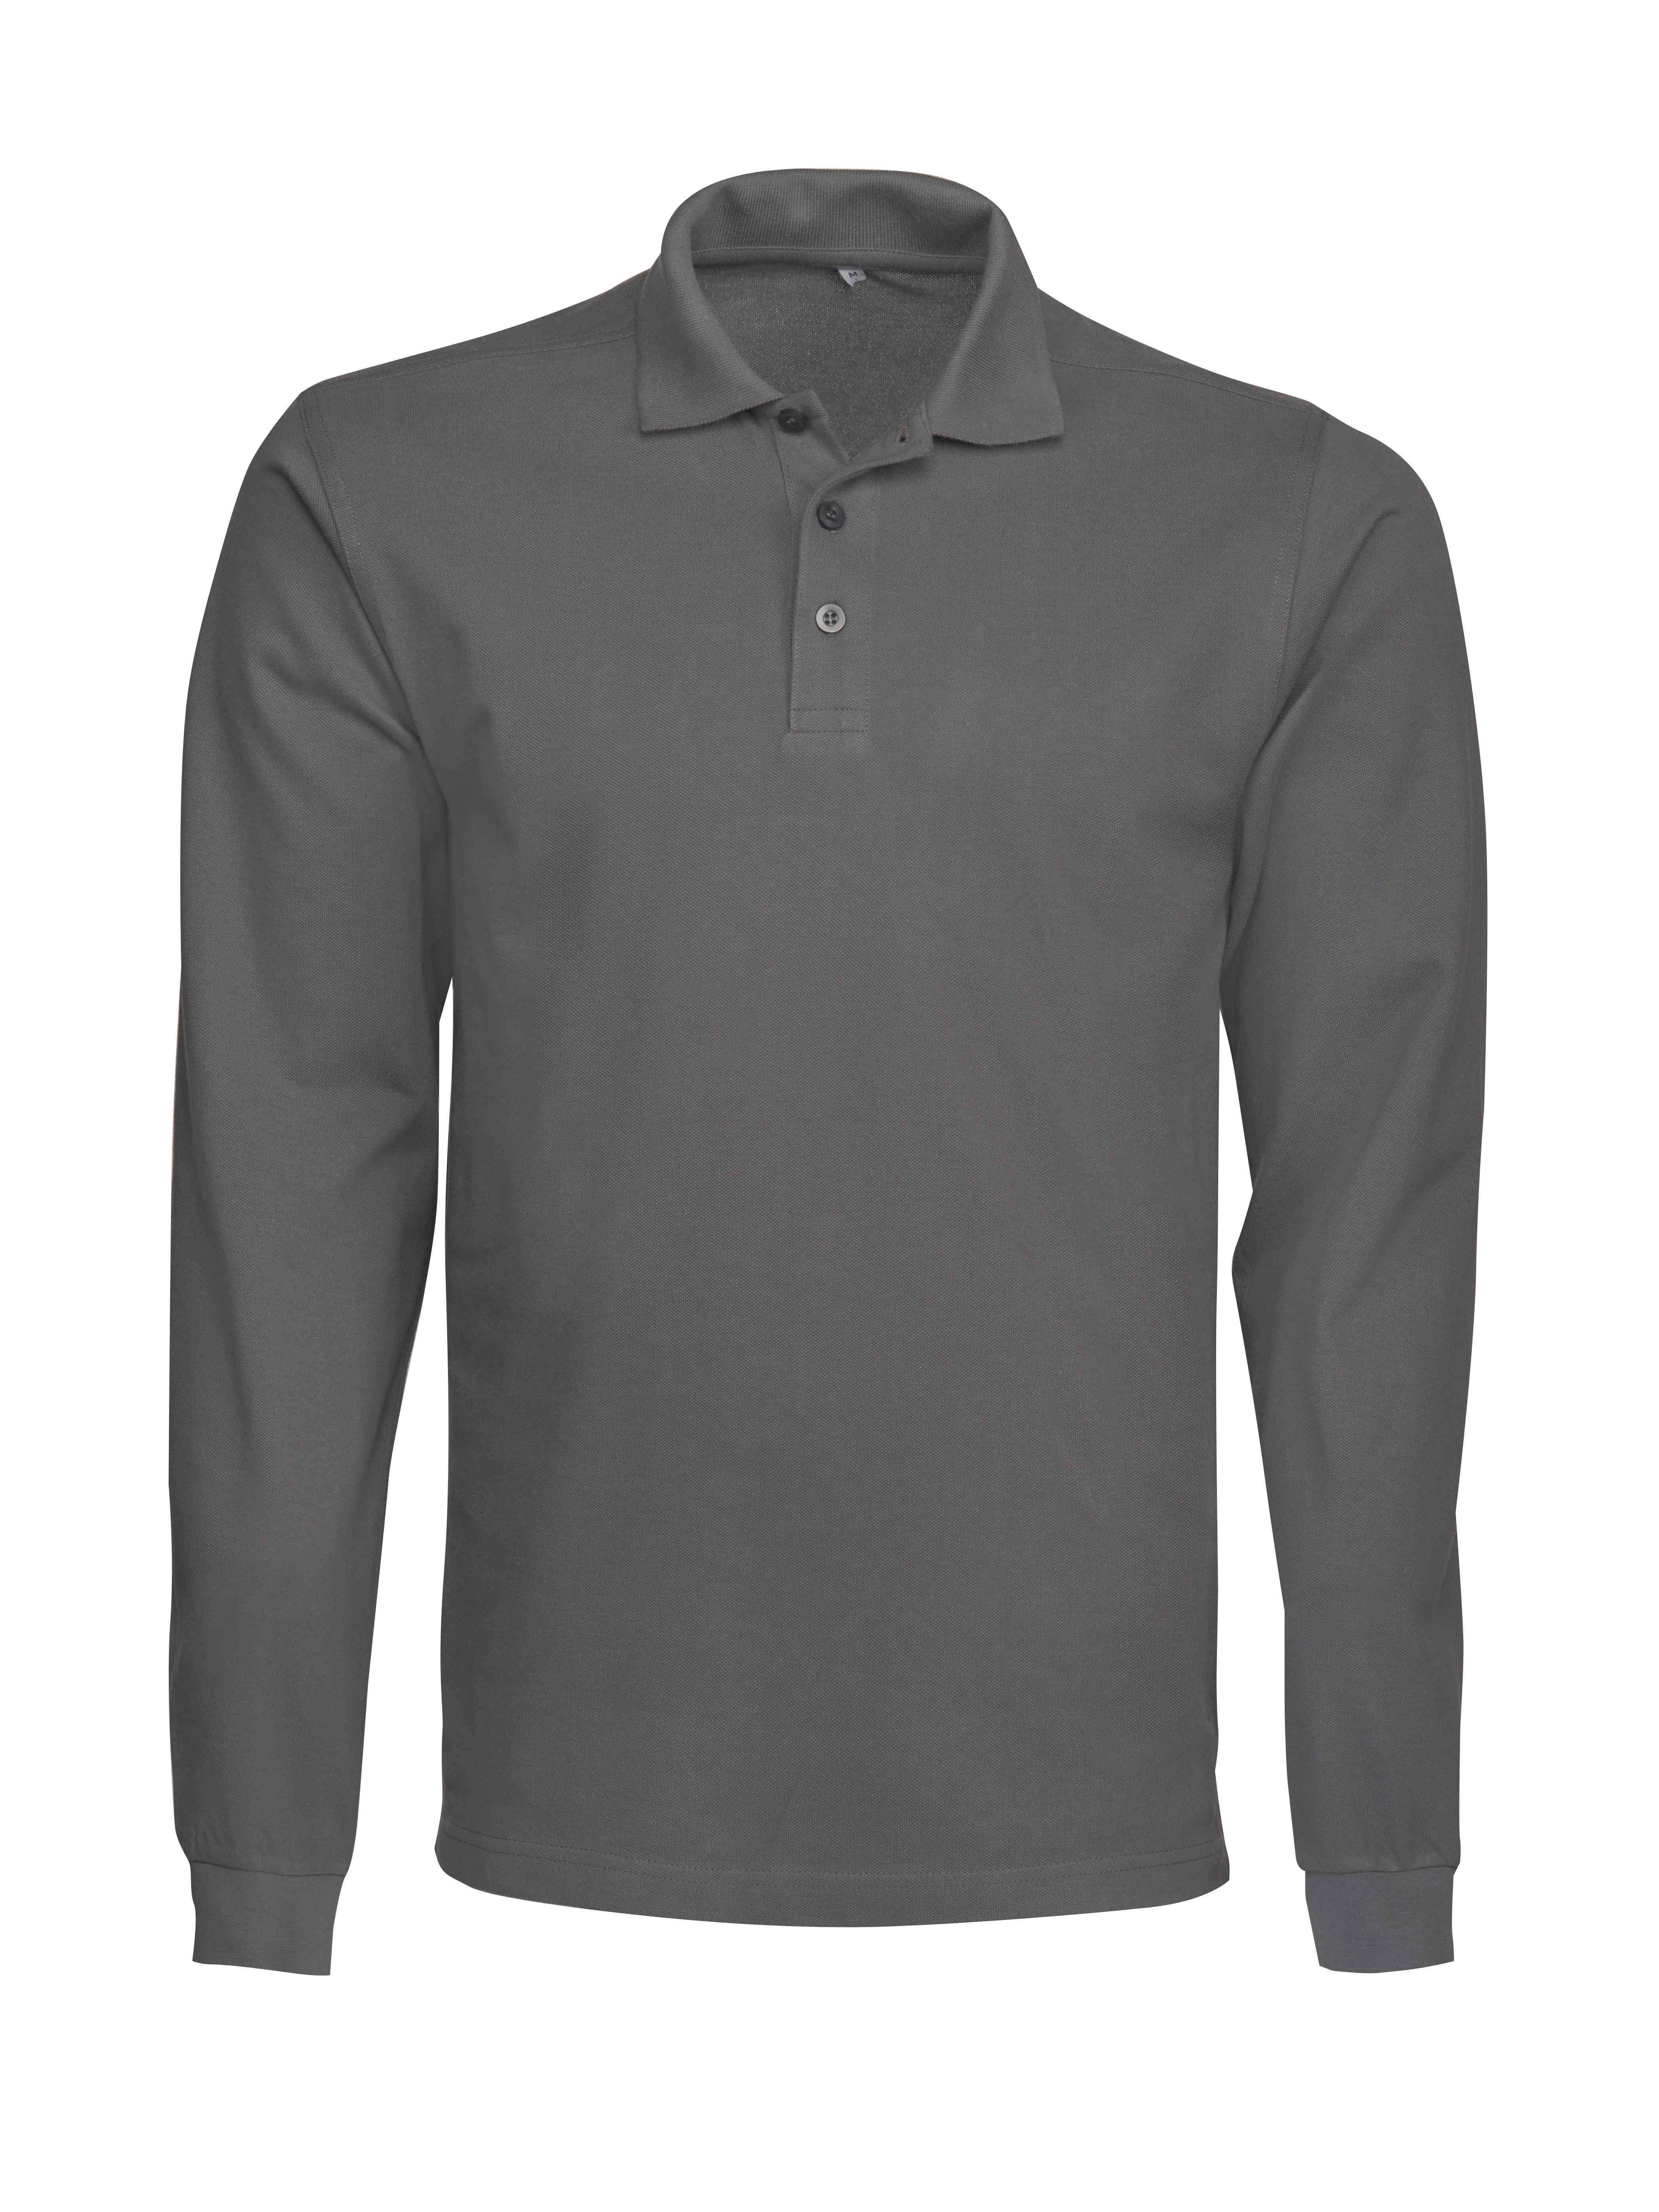 SURF POLO RSX L/S STEEL GREY PE-2265011-935-11